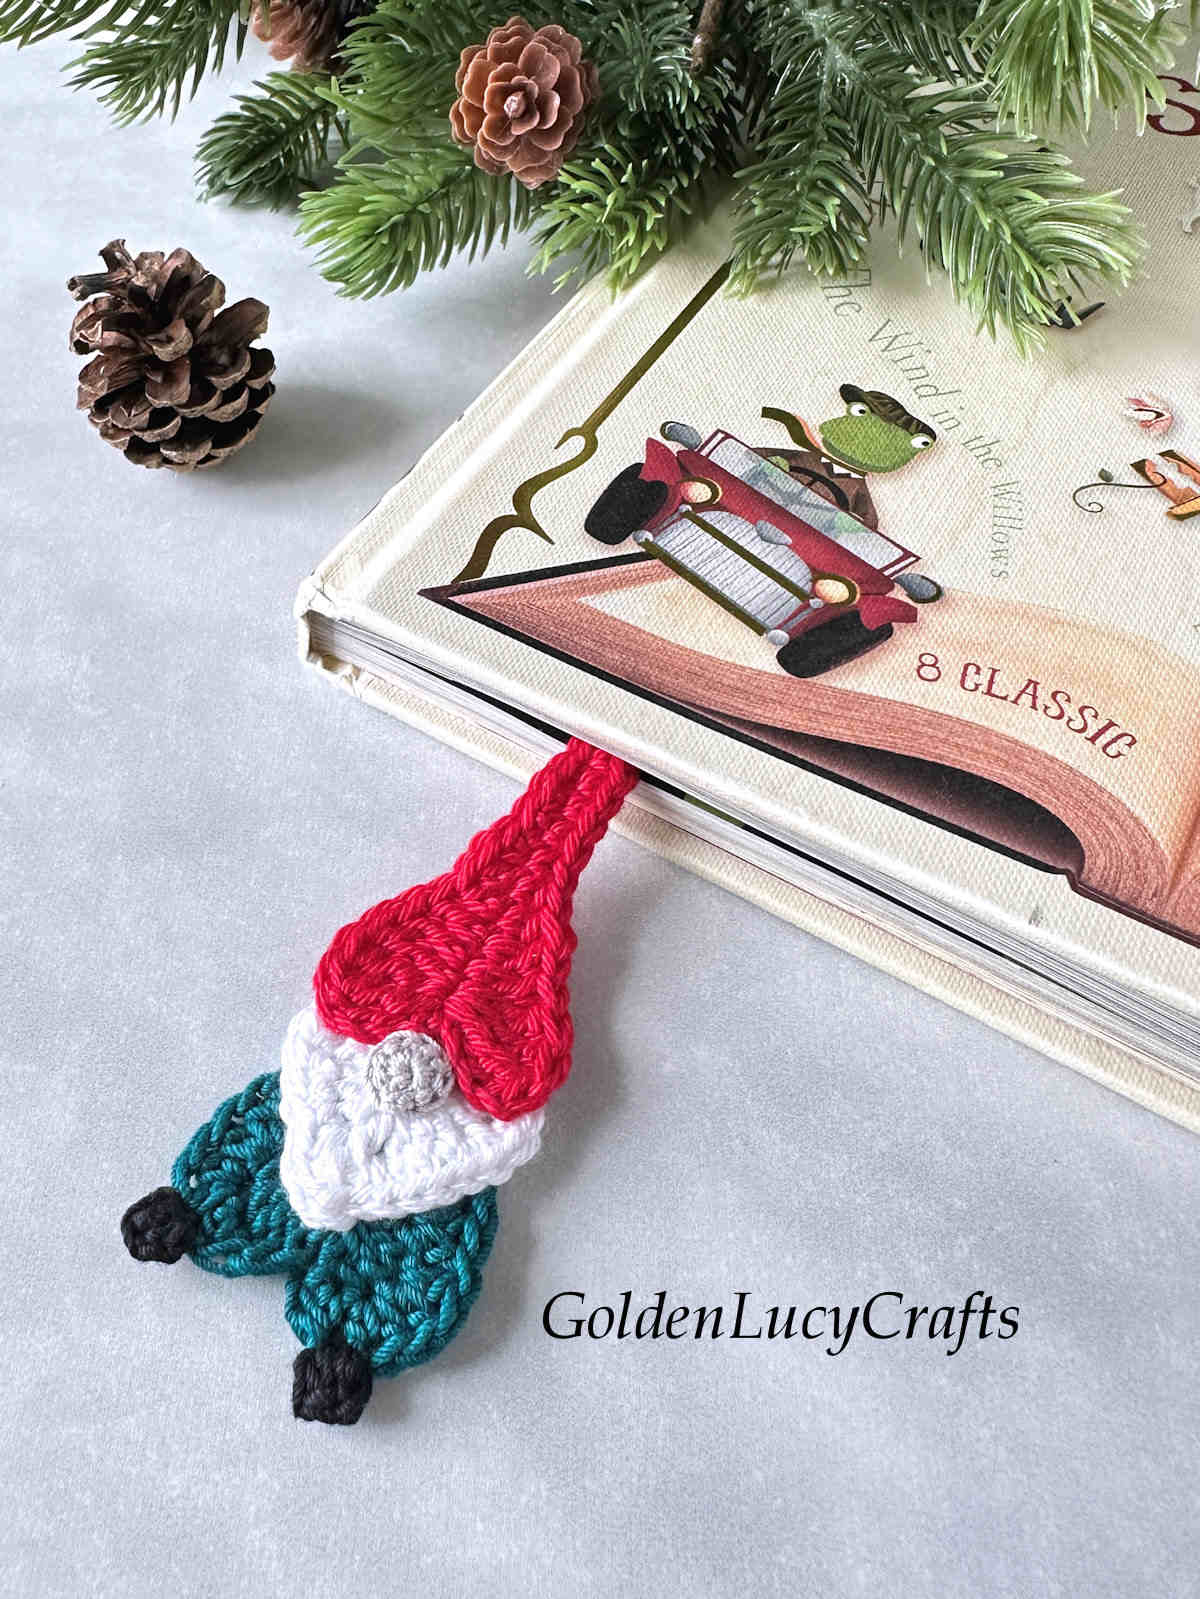 Book with crochet gnome bookmark in it.